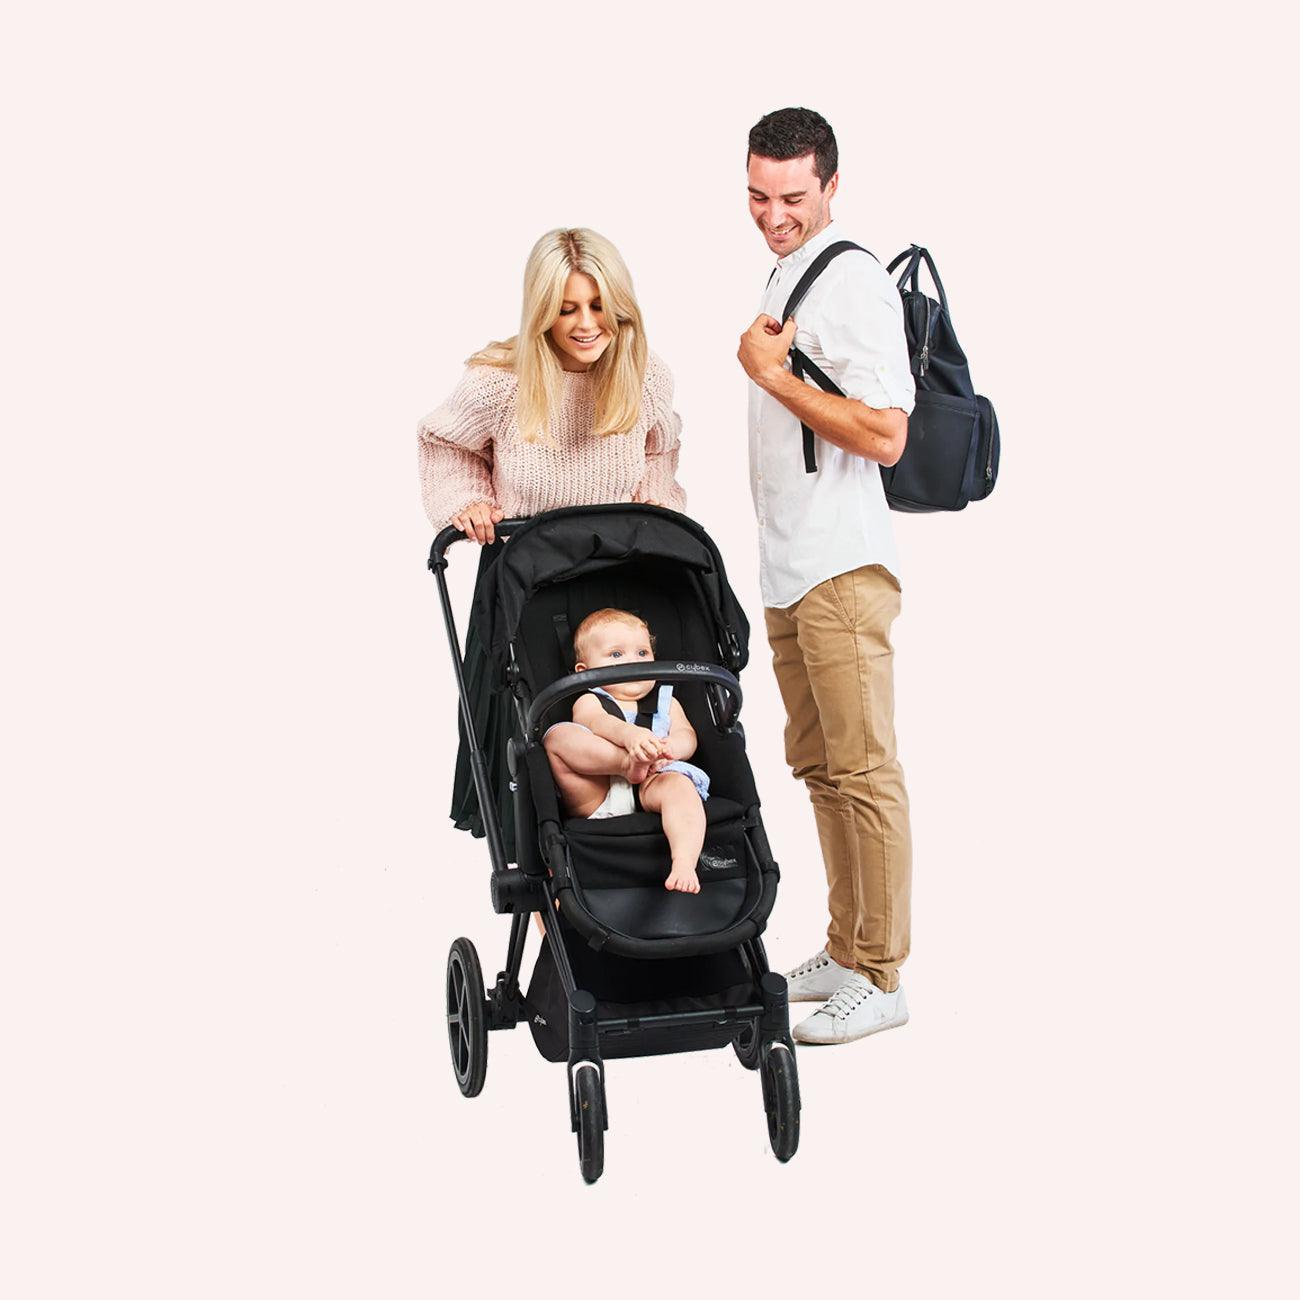 Active X Unisex Baby Backpack - Black